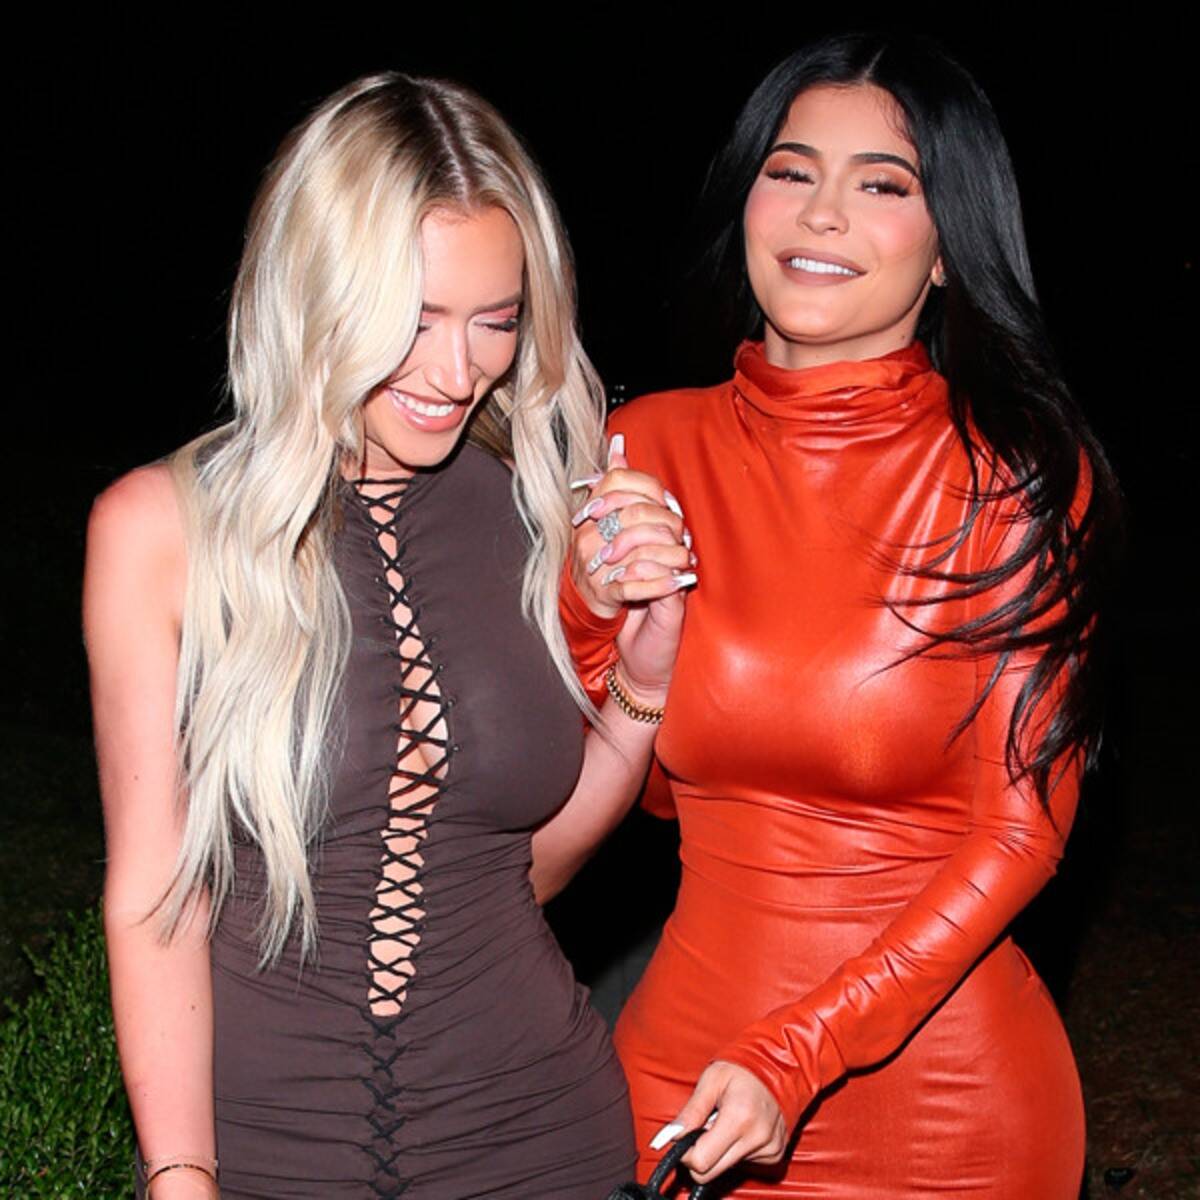 Kylie Jenner And Her BFF Stassie Re-Enacted Madonna Britney Spears And Madonna's Famous VMA Kiss